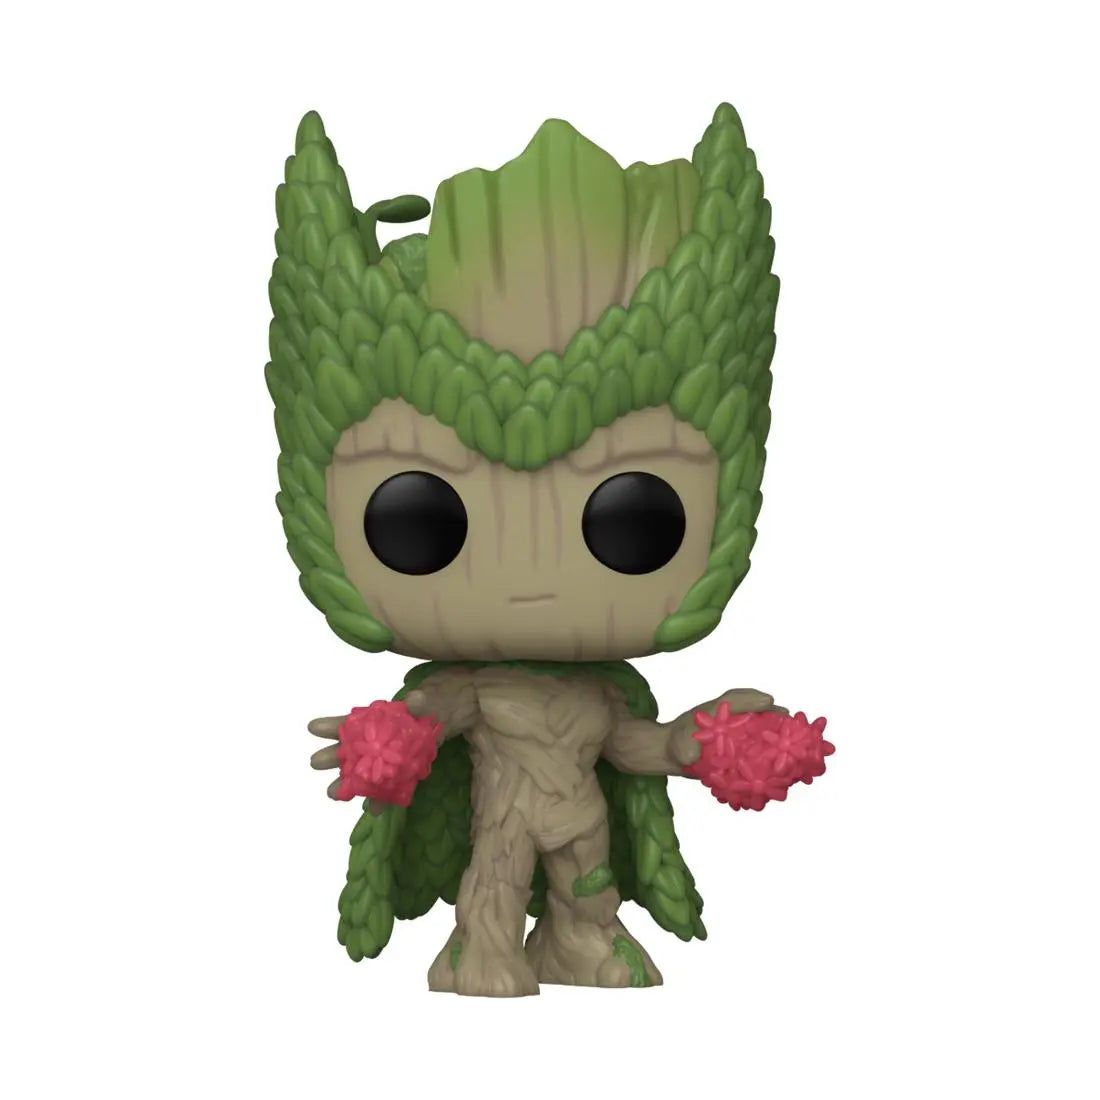 Funko Pop! Marvel We Are Groot 1395 Groot as Scarlet Witch Funko